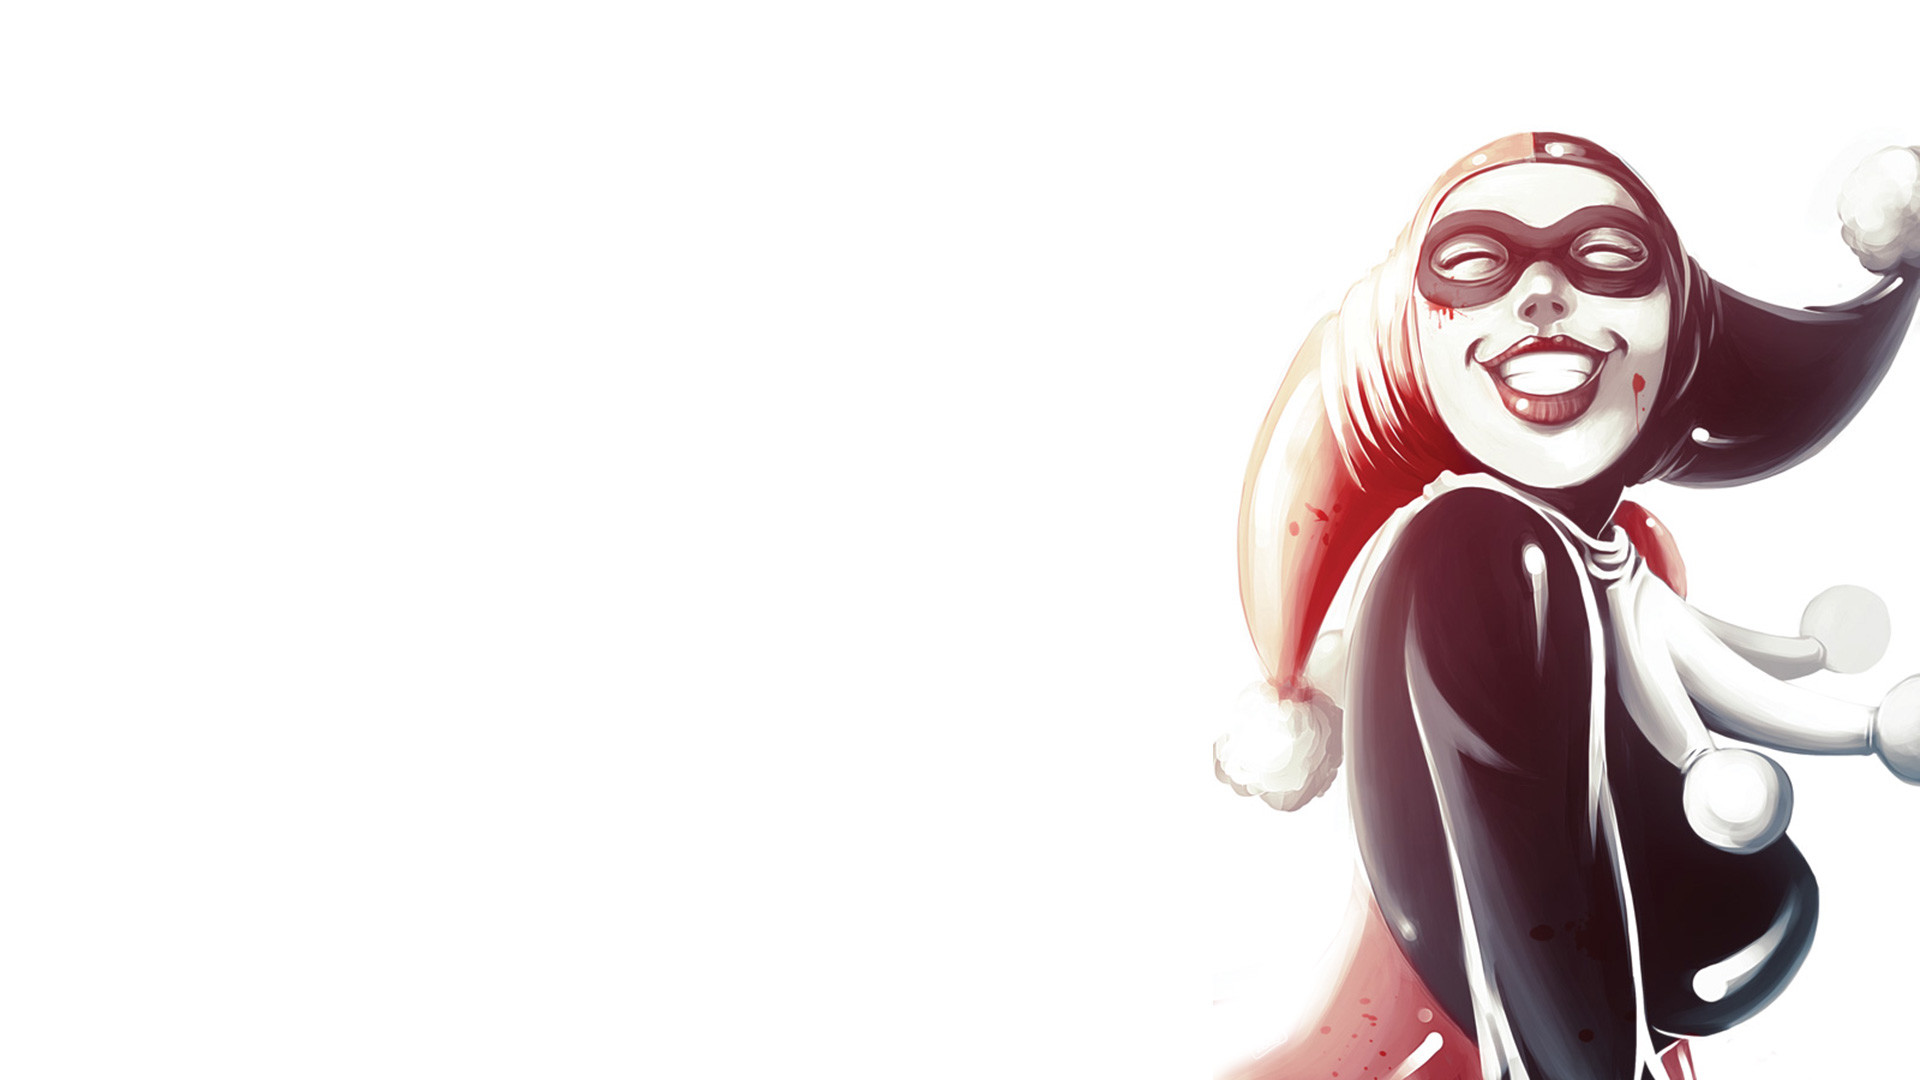 1920x1080 353 Harley Quinn HD Wallpapers | Backgrounds - Wallpaper Abyss - Page 4